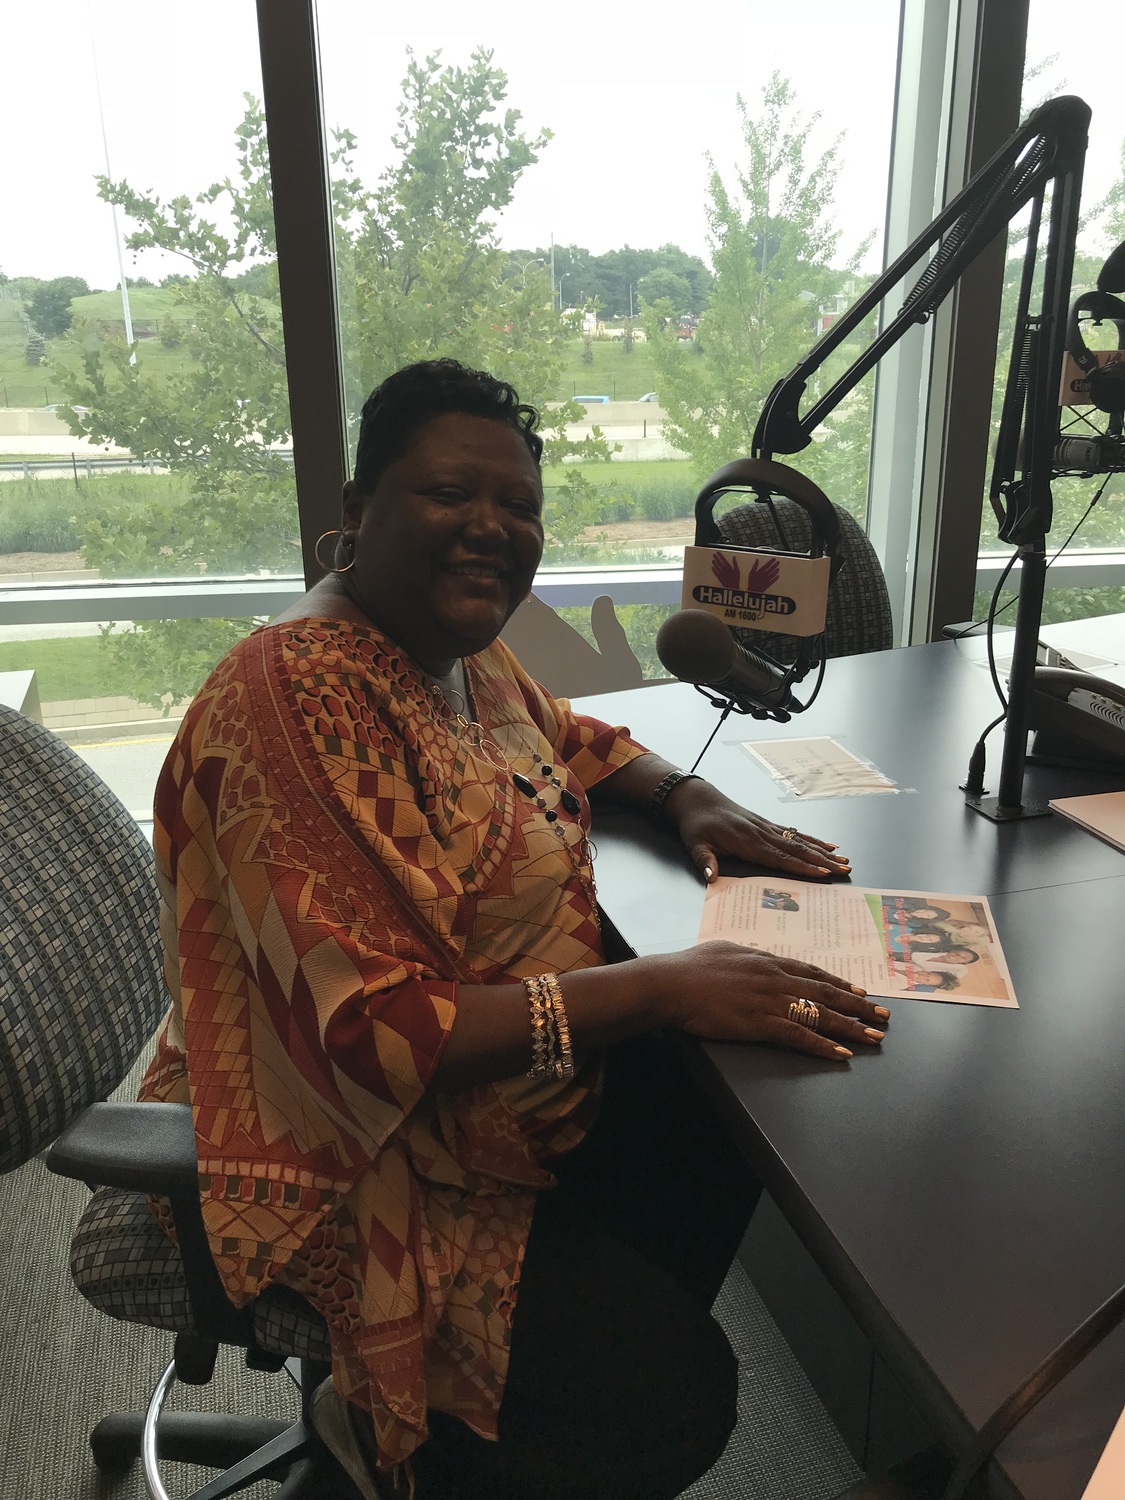 Gallery Photo of LaDonna Turner, LCSW, Chief Clinician talks about the Live SMART Healing & Restoration Counseling Center on IHeart Radio Gospel 1600 AM in St. Louis.